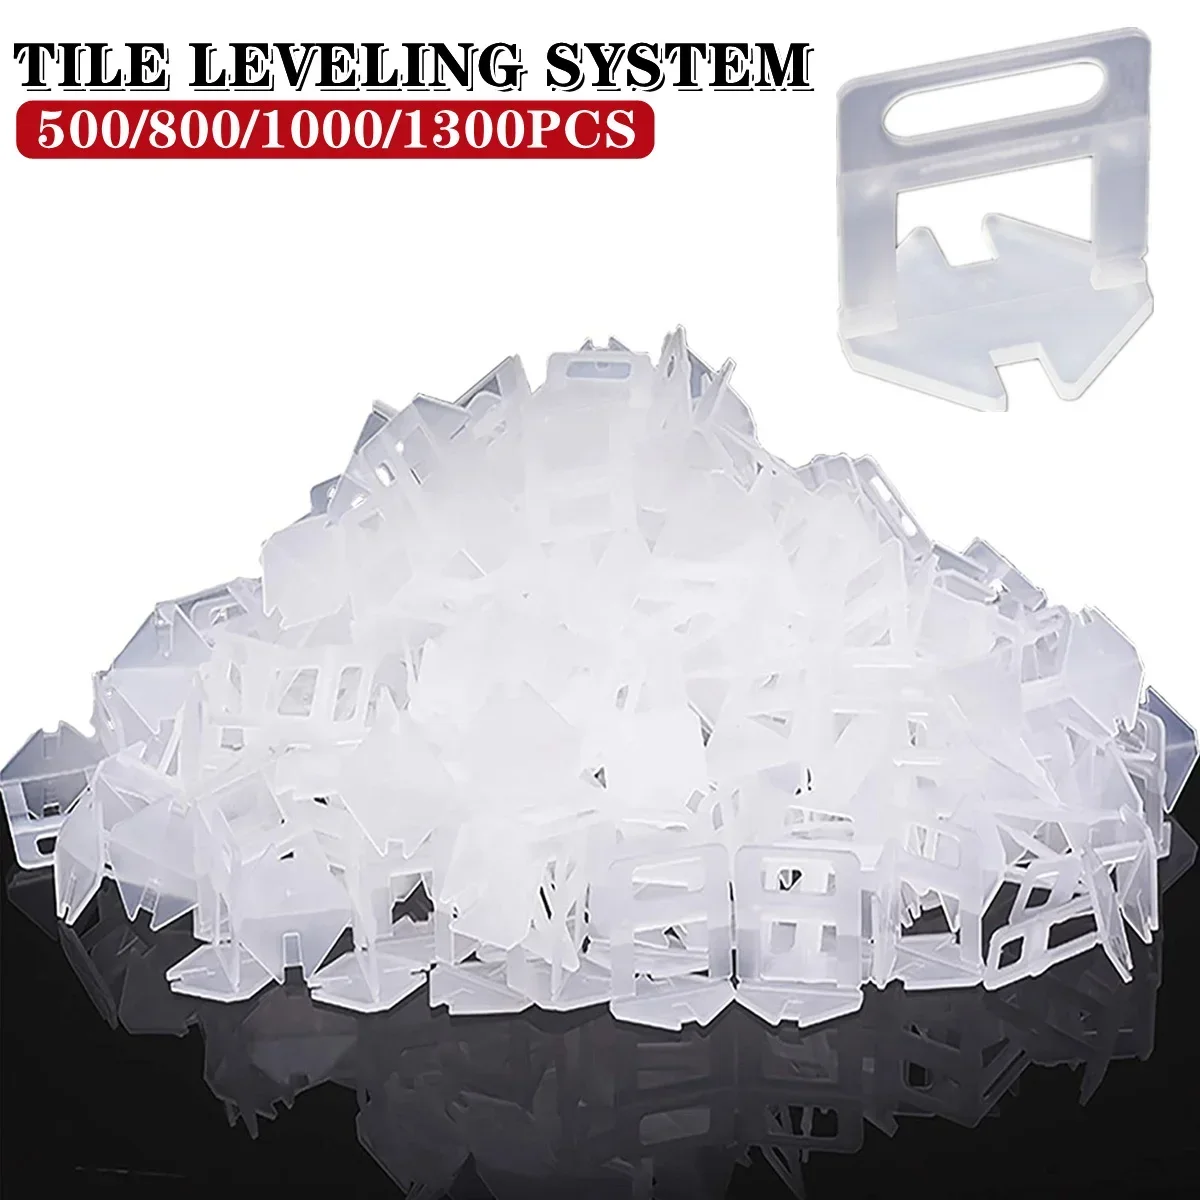 Tile Leveling System Clips 500-1300Pcs Tile Spacers 1MM-3MM for Ceramic Wall Tile Laying Construction Tools  Leveler Spacers 351pcs level wedges tile spacers for flooring wall tile spacer tile leveling system leveler locator spacers plier